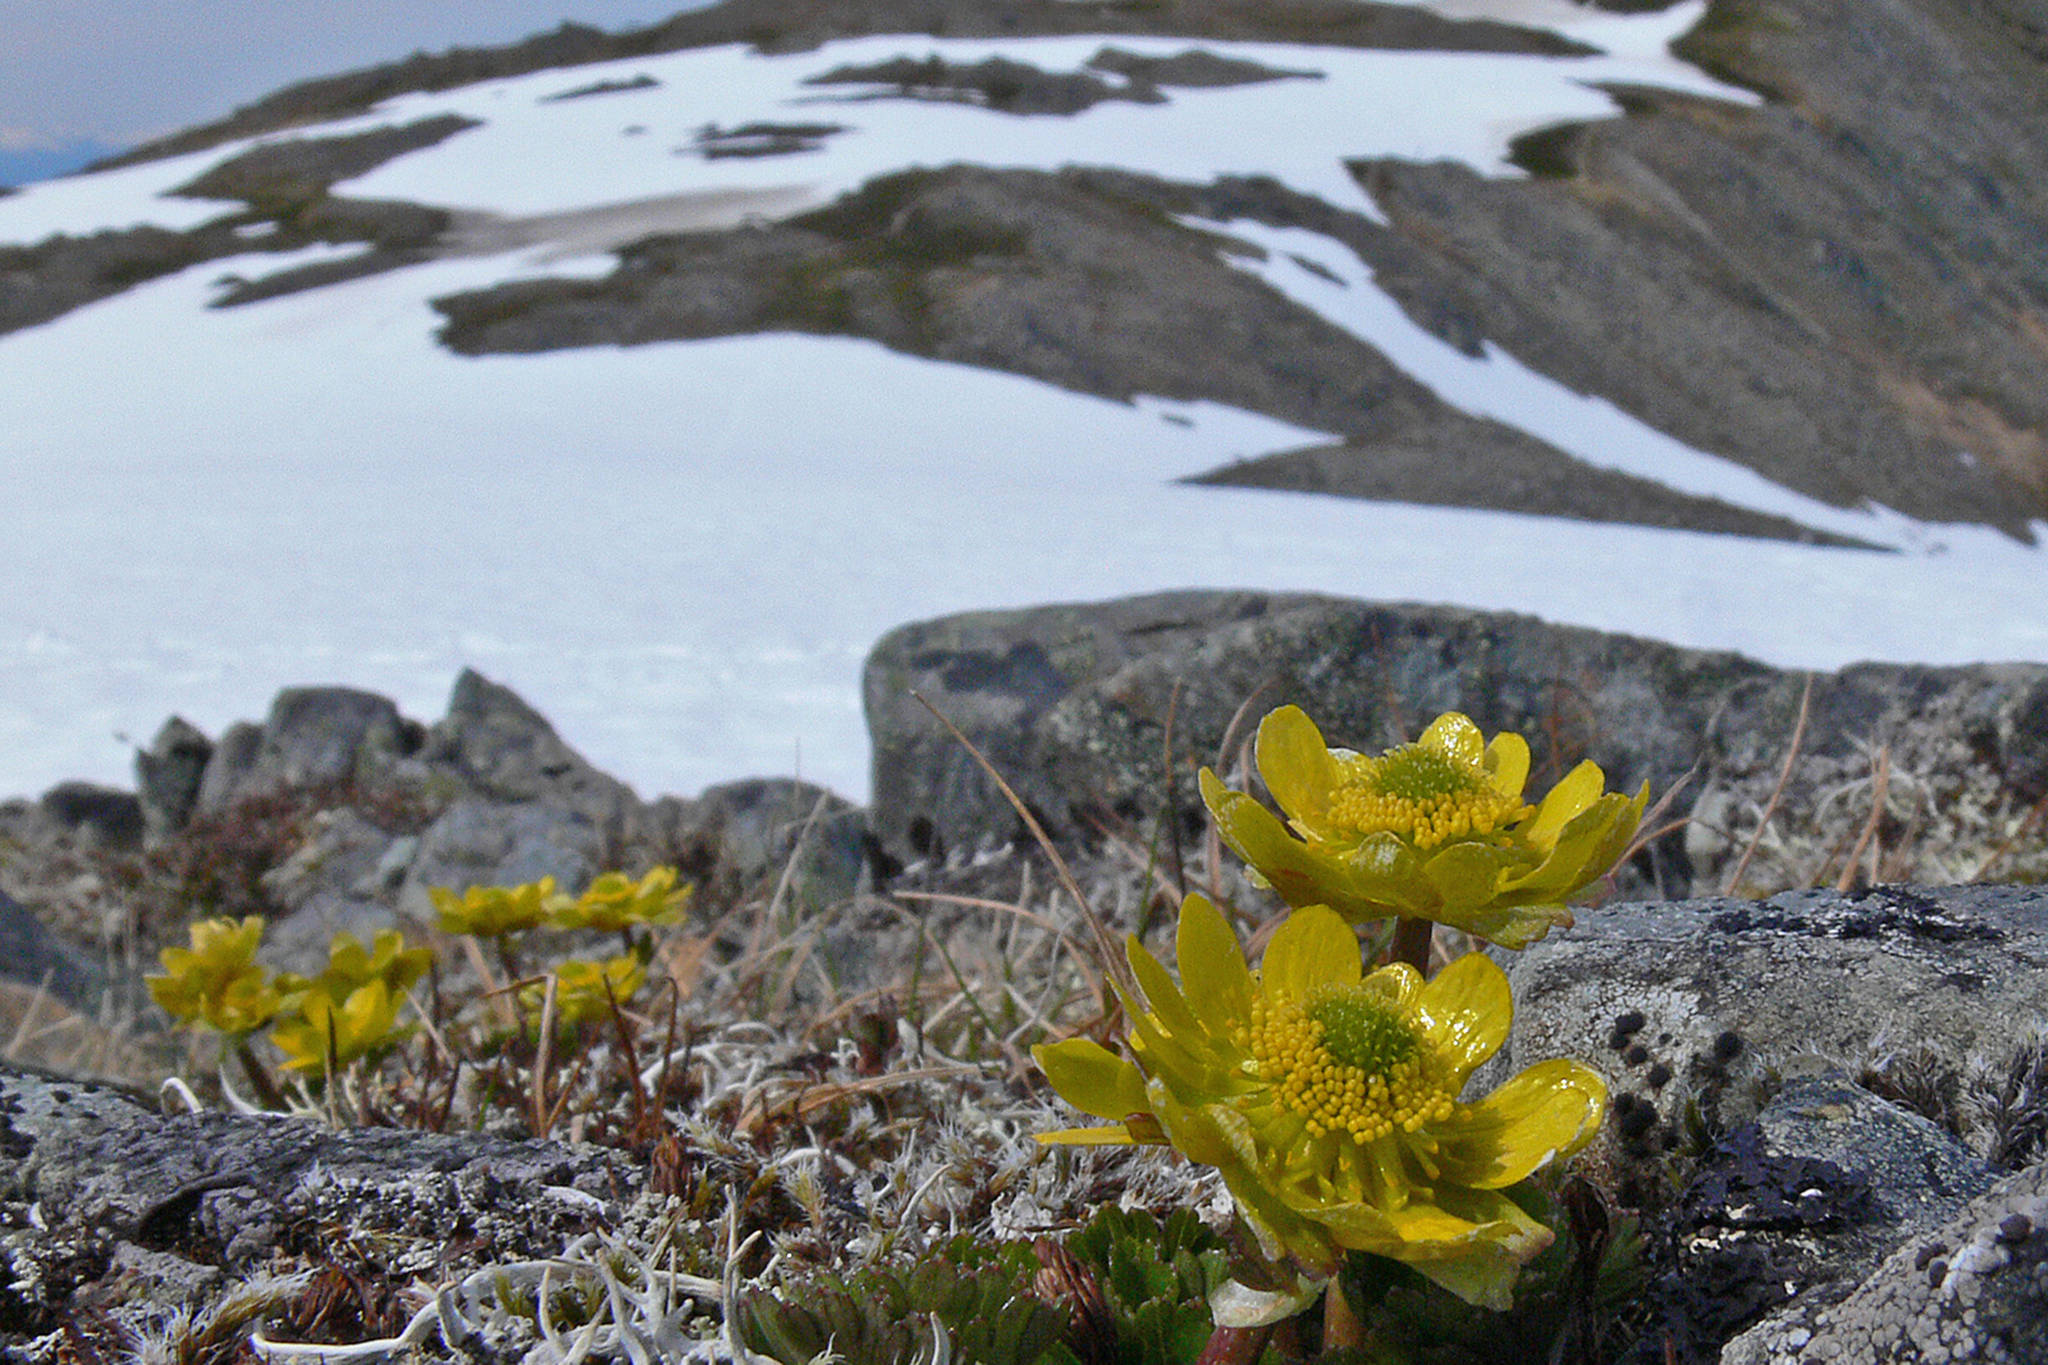 Cooley’s buttercup is one of the early flowers to bloom on Mount Roberts. (Courtesy Photo / Bob Armstrong)